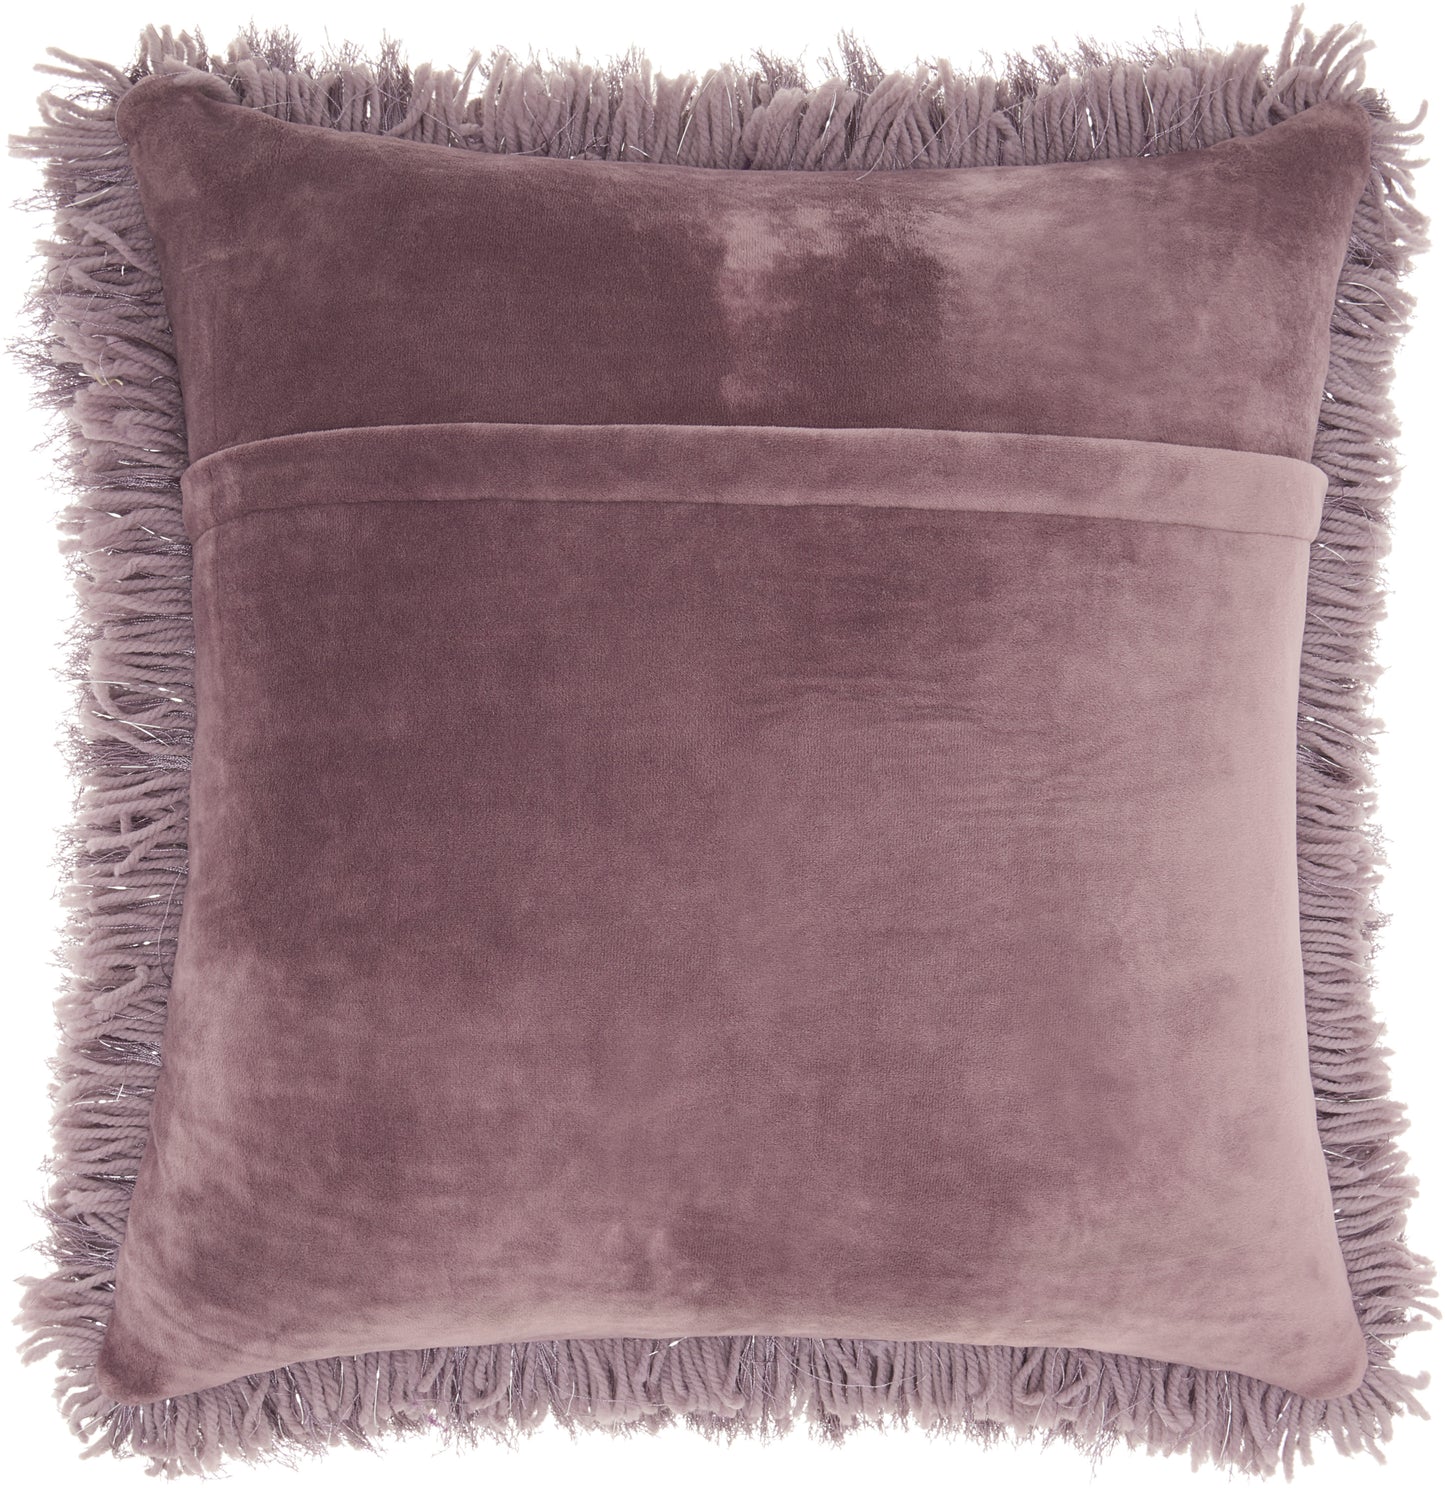 Shag TL004 Synthetic Blend Yarn Shimmer Shag Throw Pillow From Mina Victory By Nourison Rugs